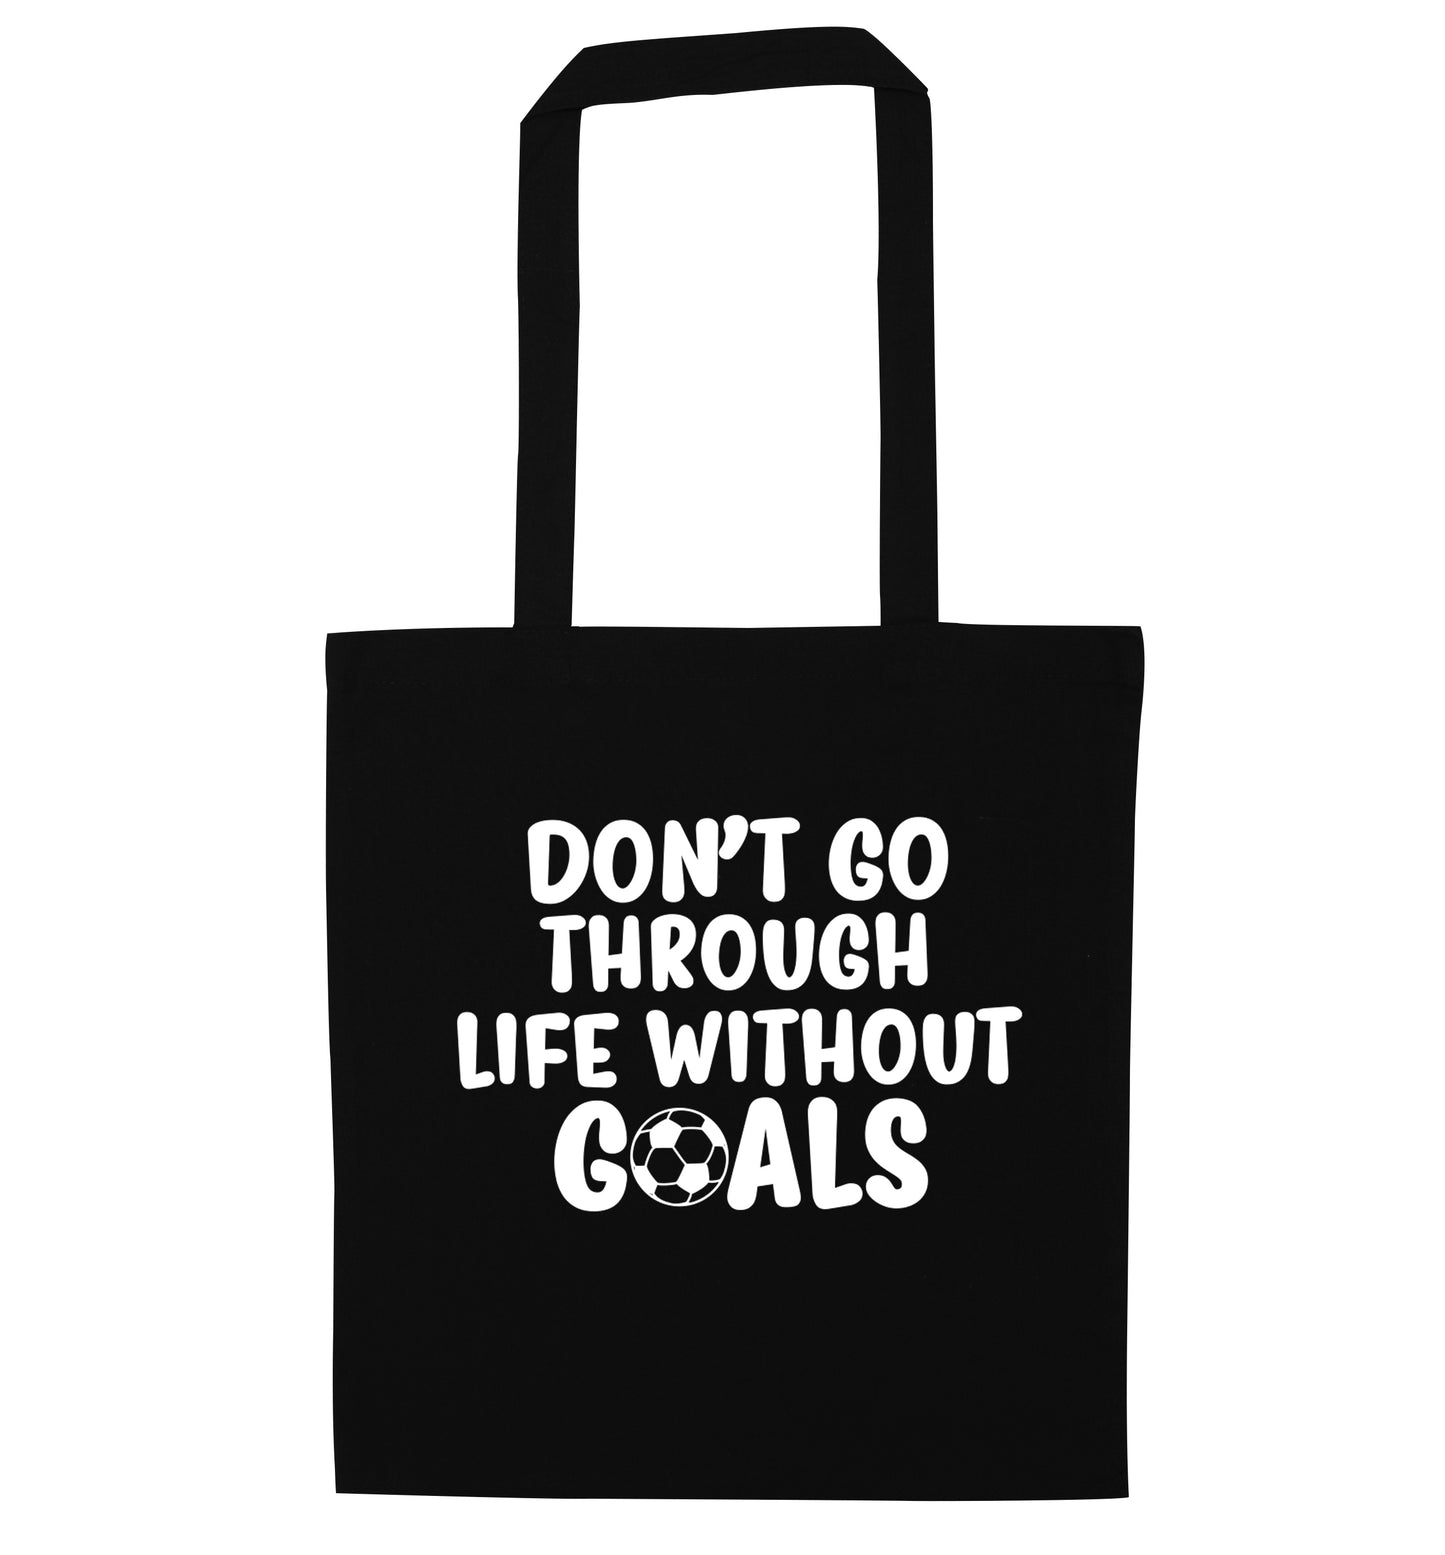 Don't go through life without goals black tote bag